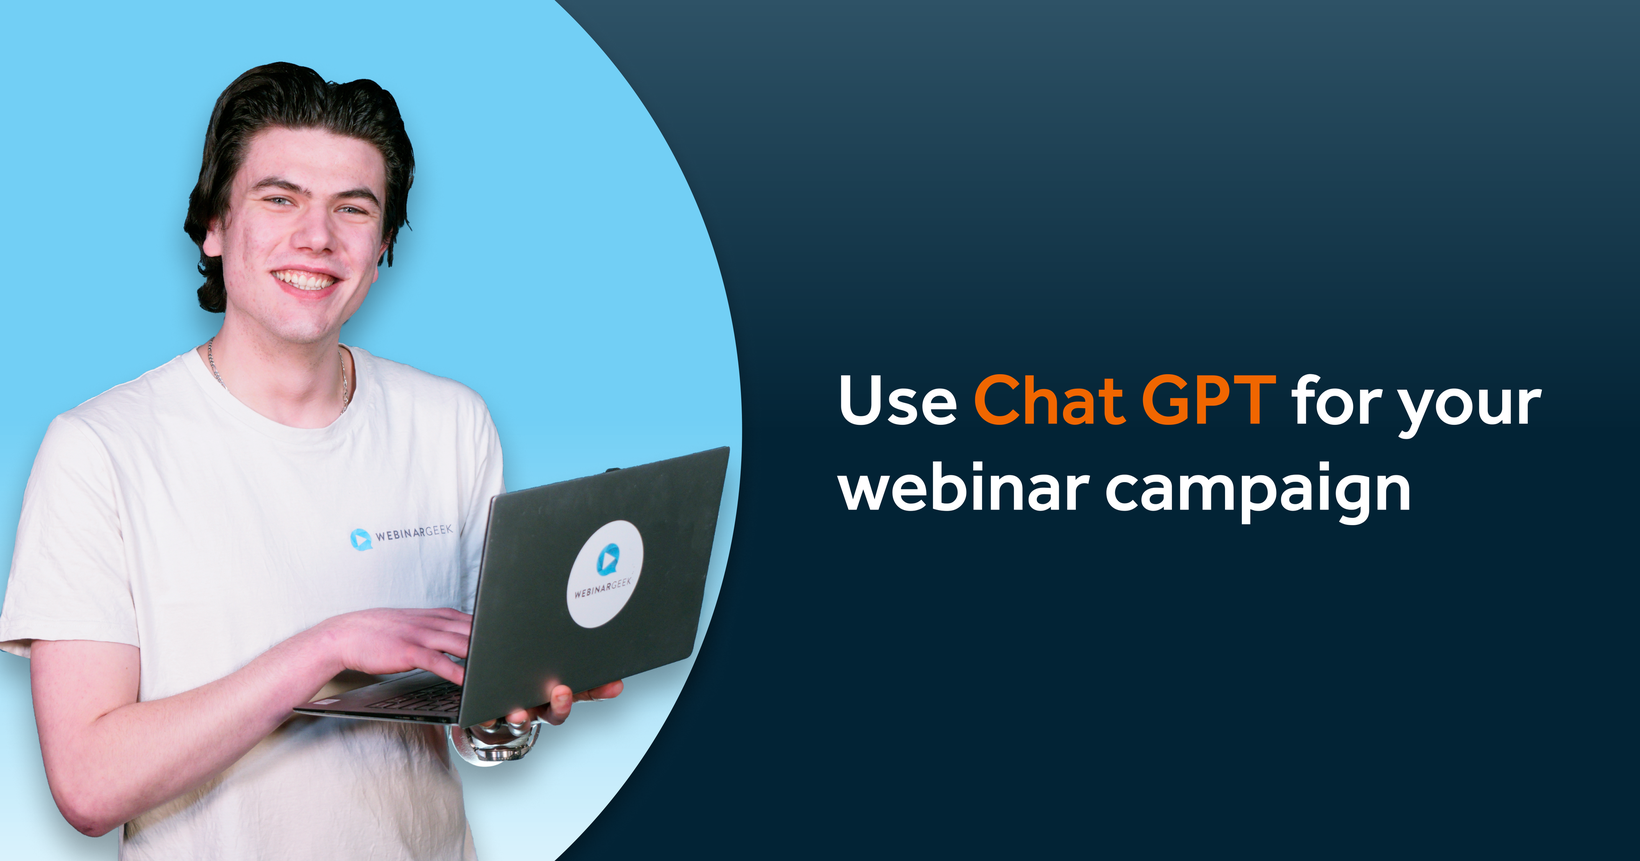 How to use Chat GPT for your webinar campaign | WebinarGeek